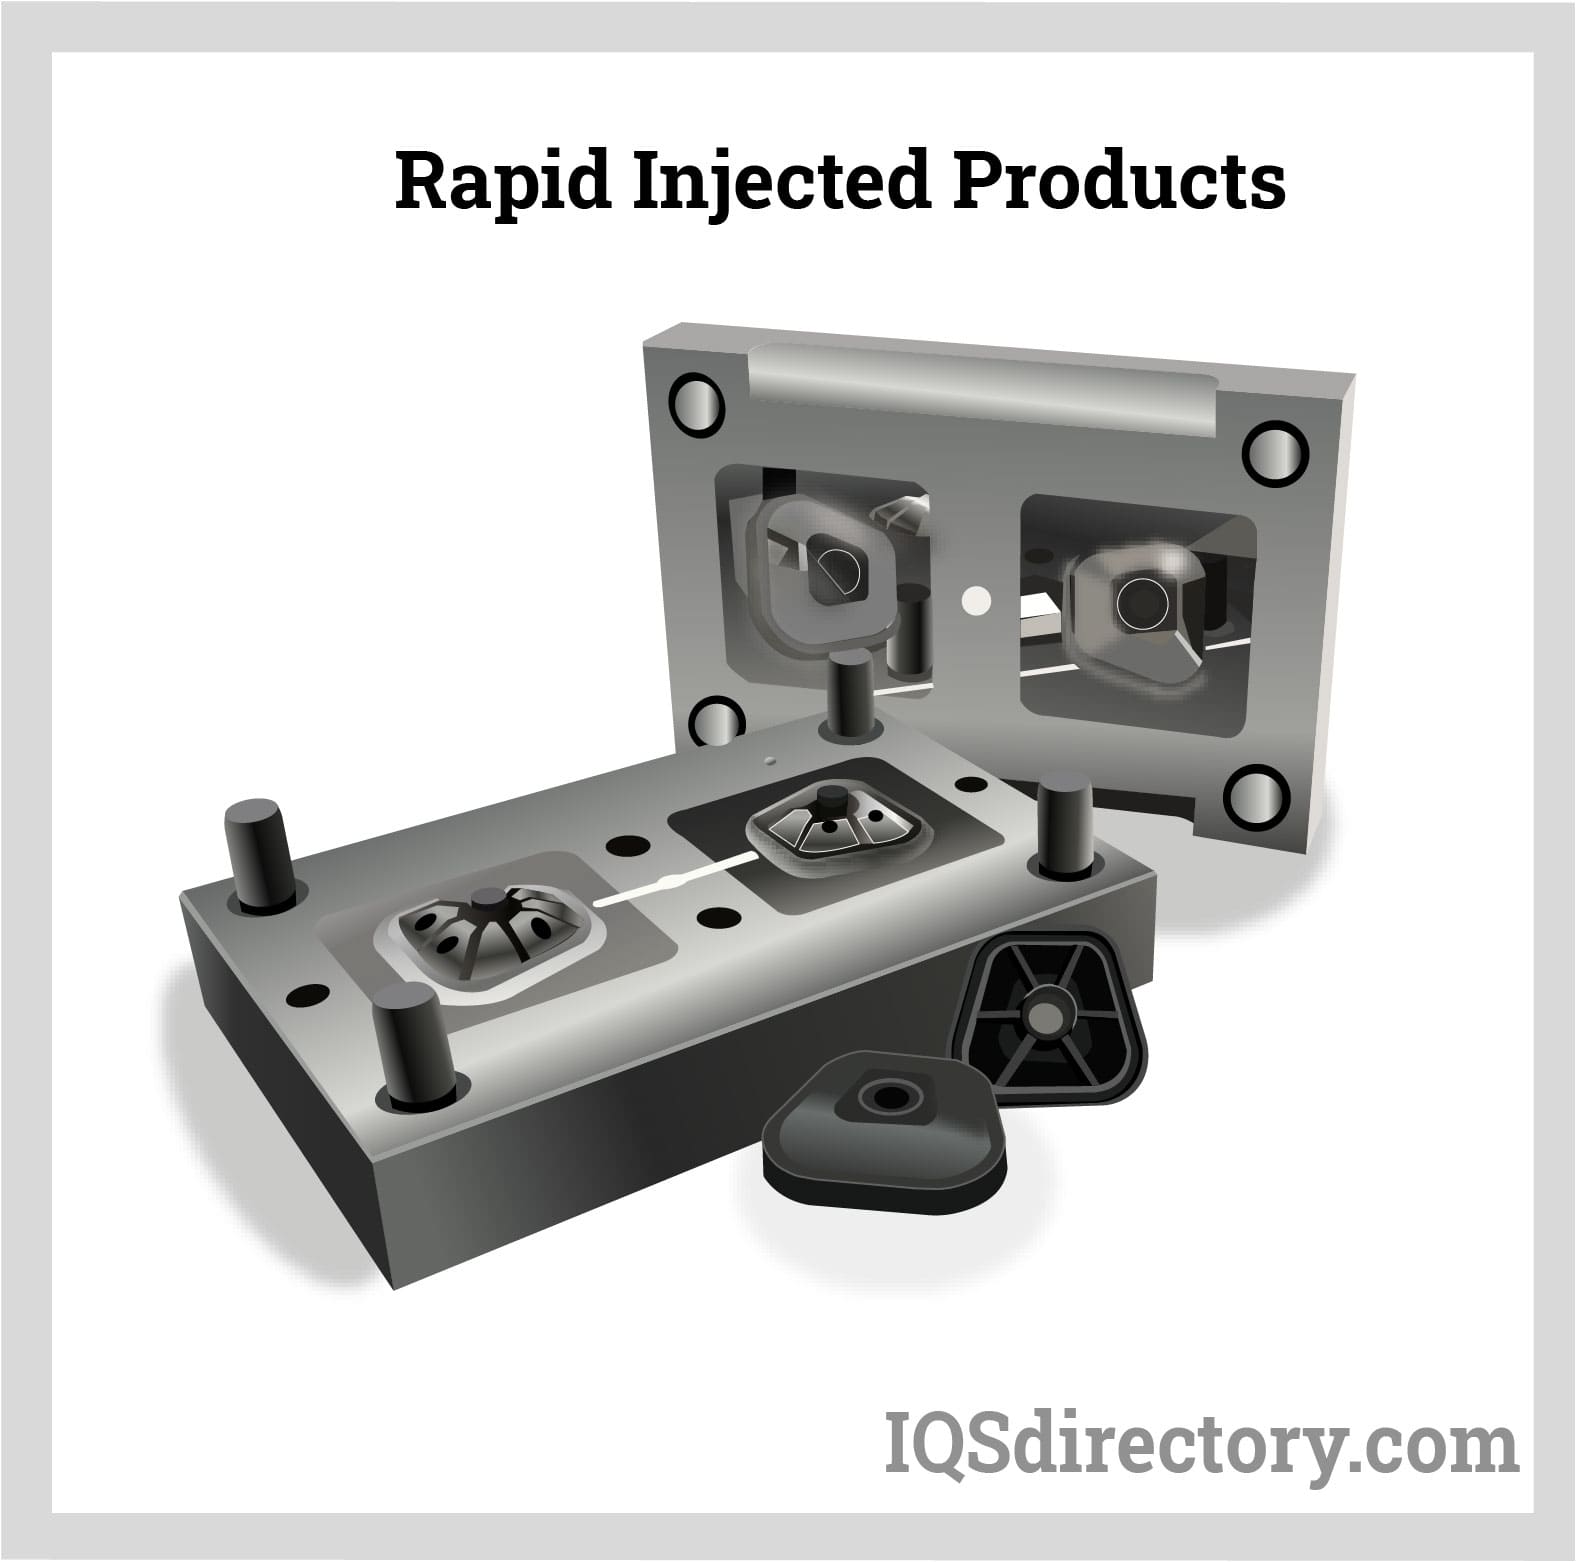 Rapid Injected Products